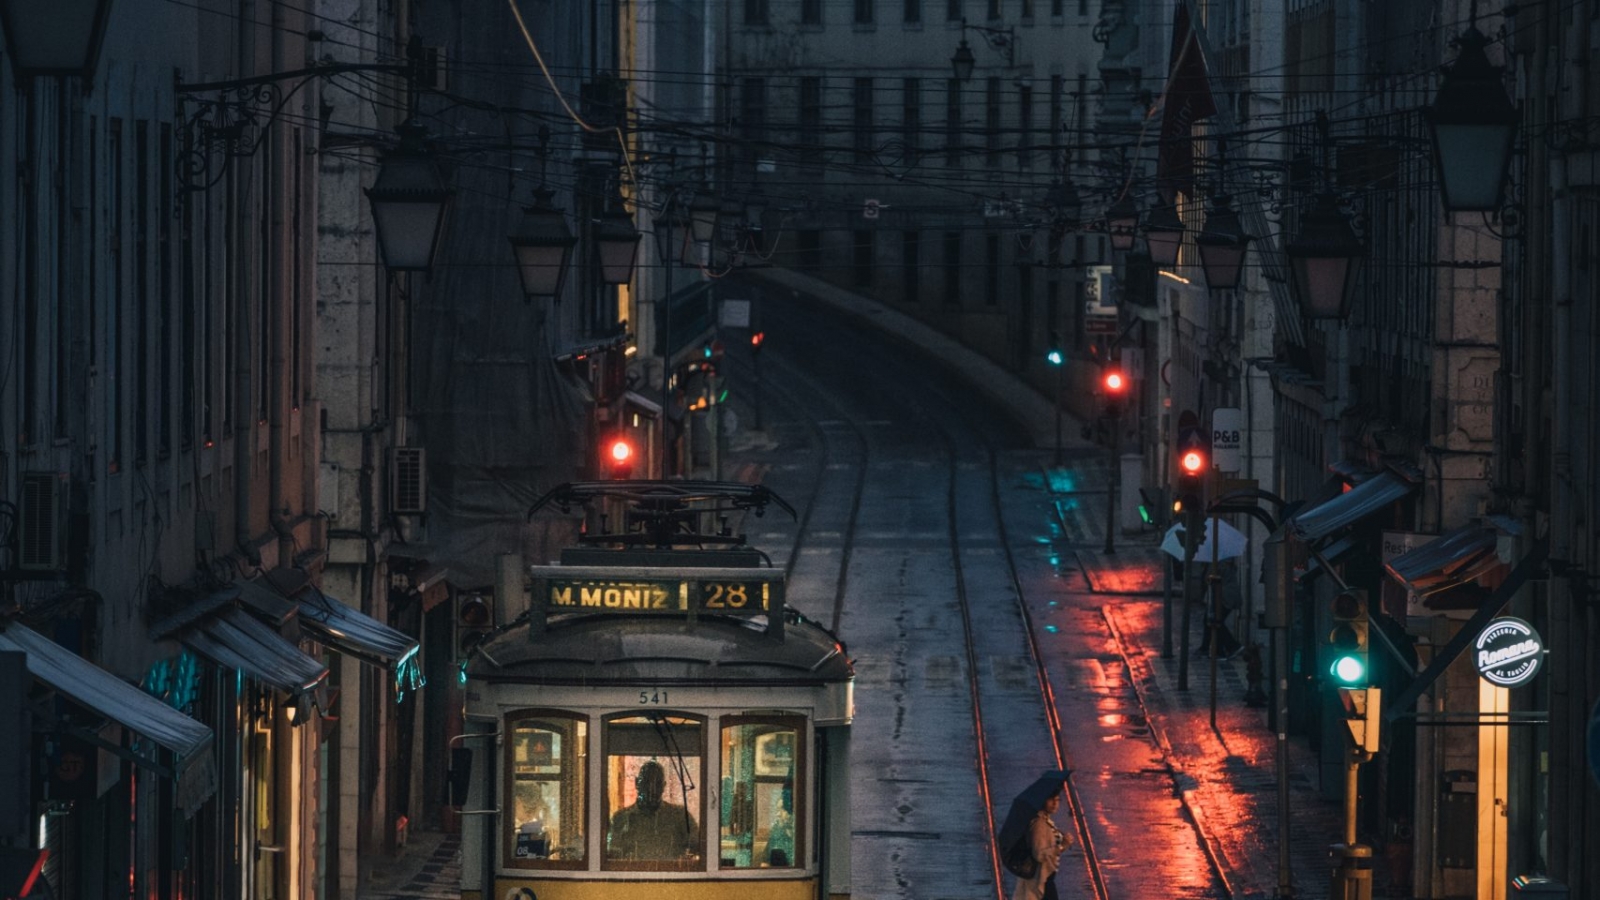 A vertical shot of a tramway as it passes through the buildings of a city during nighttime